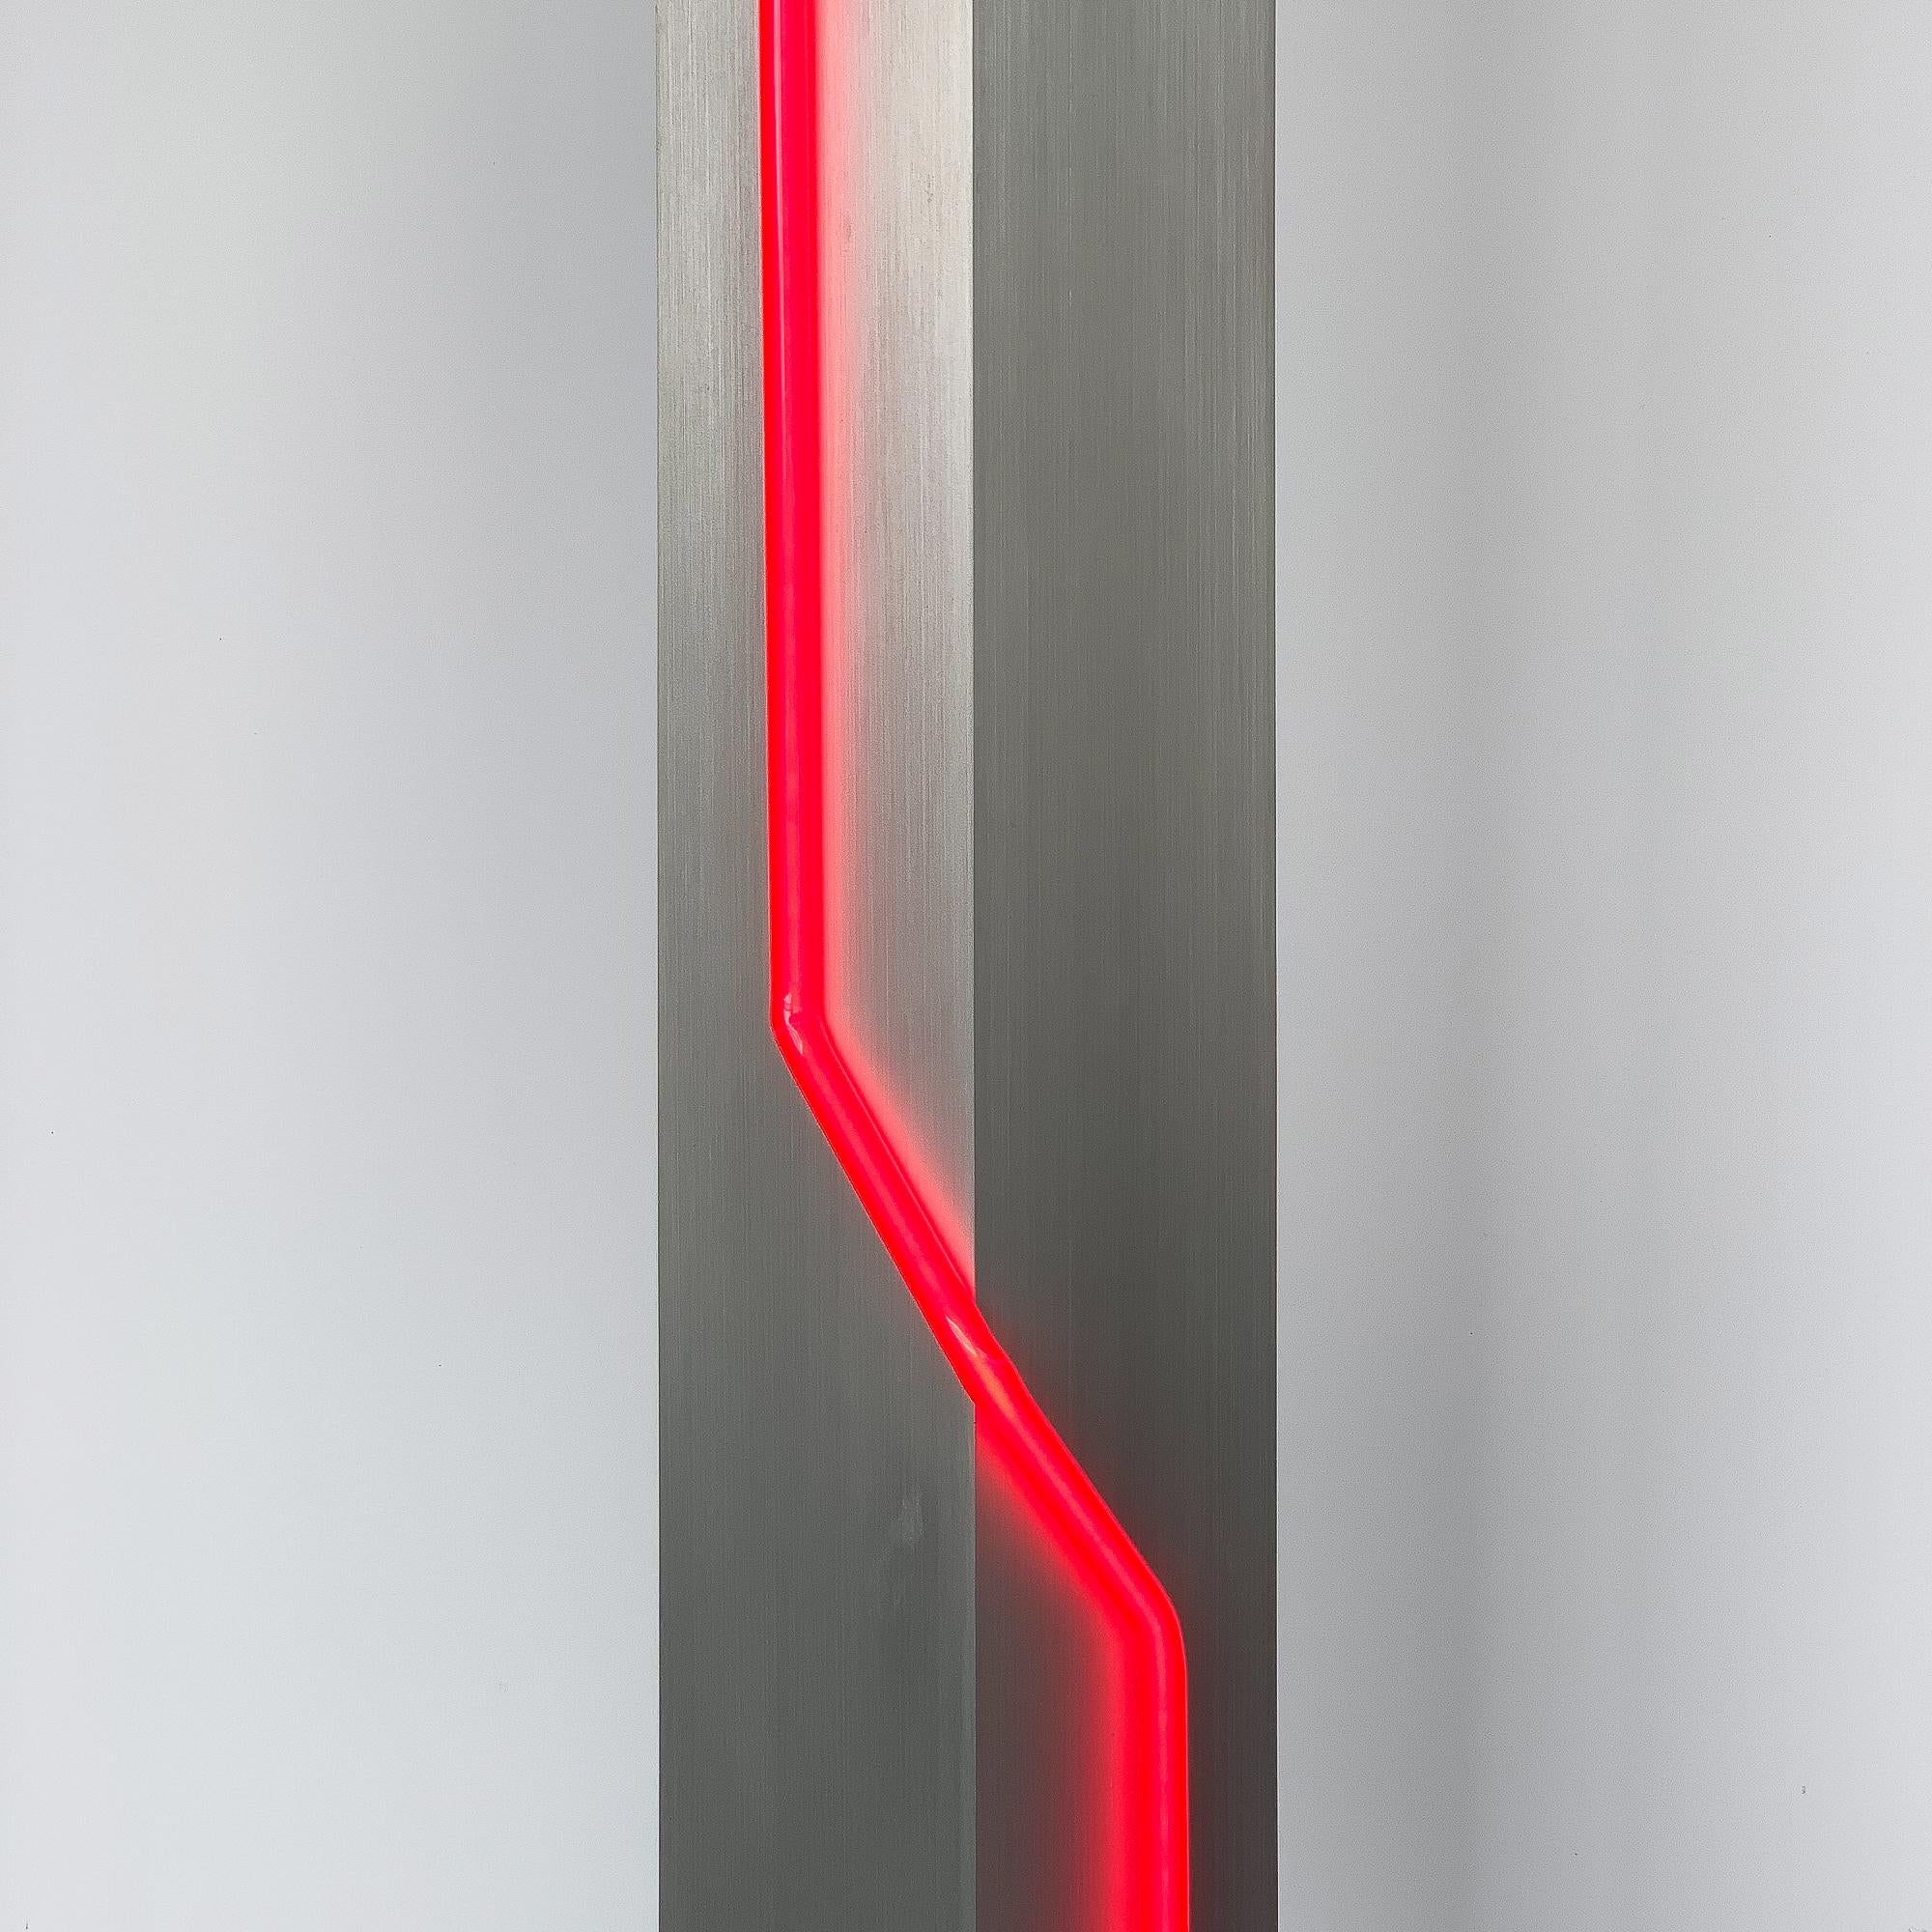 Brushed Rare Red Neon and Aluminum Floor Lamp by Rudi Stern and Don Chelsea for Kovacs